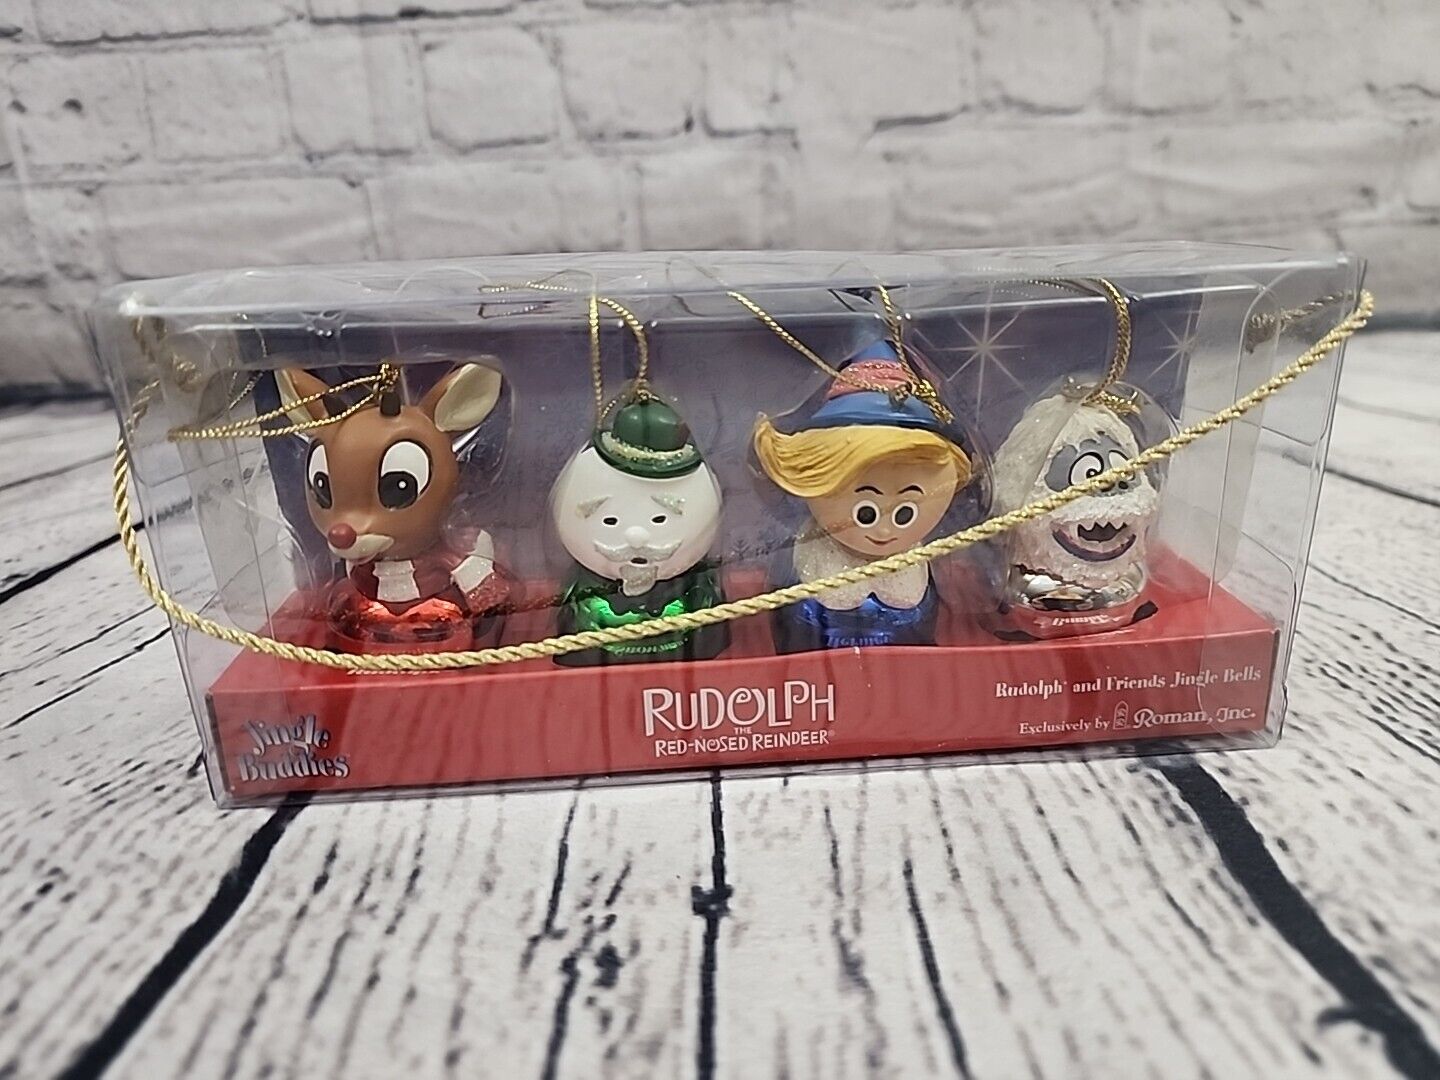 Rudolph The Red-Nosed Reindeer Jingle Buddy Jingle Bells Christmas Ornaments